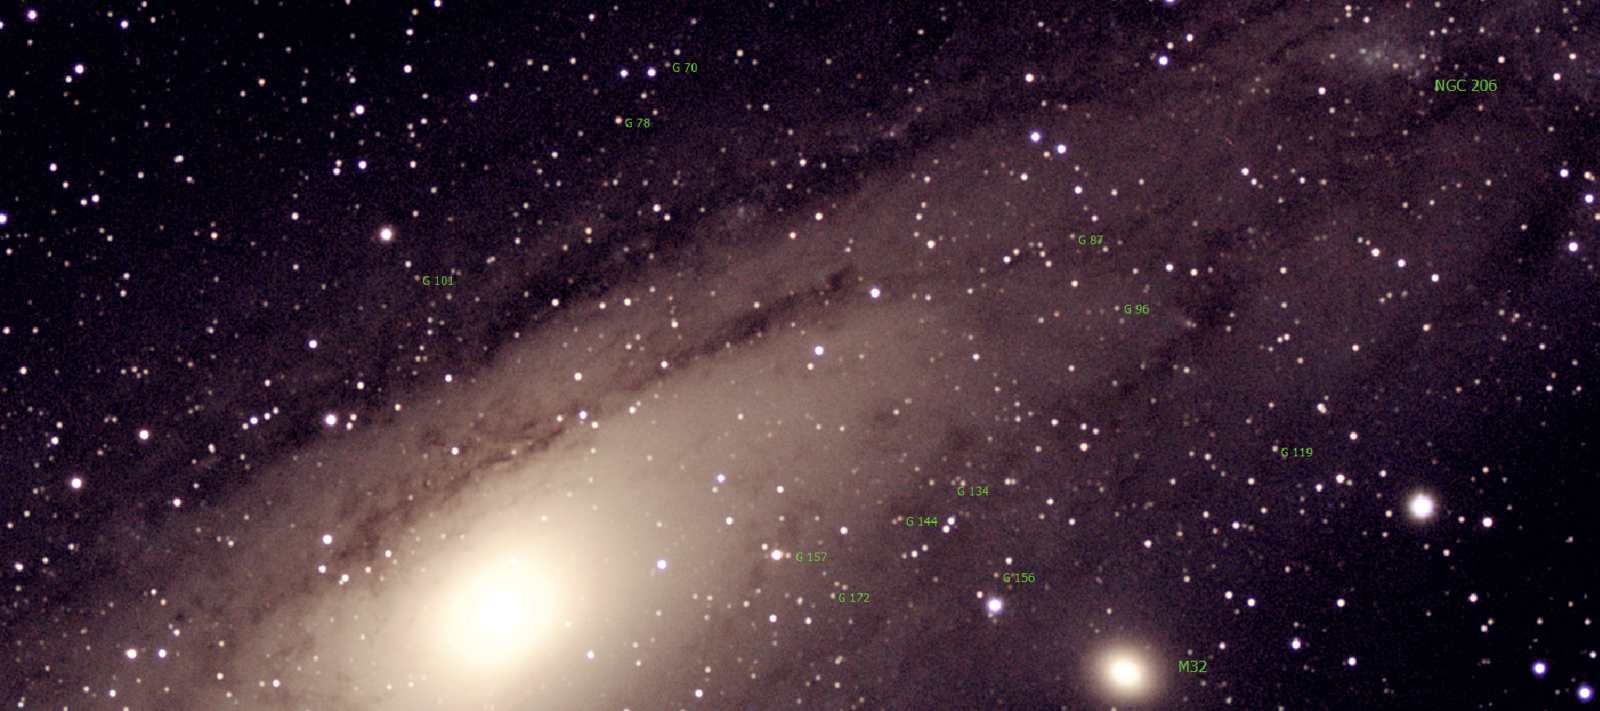 M31 with Globular Clusters Labeled